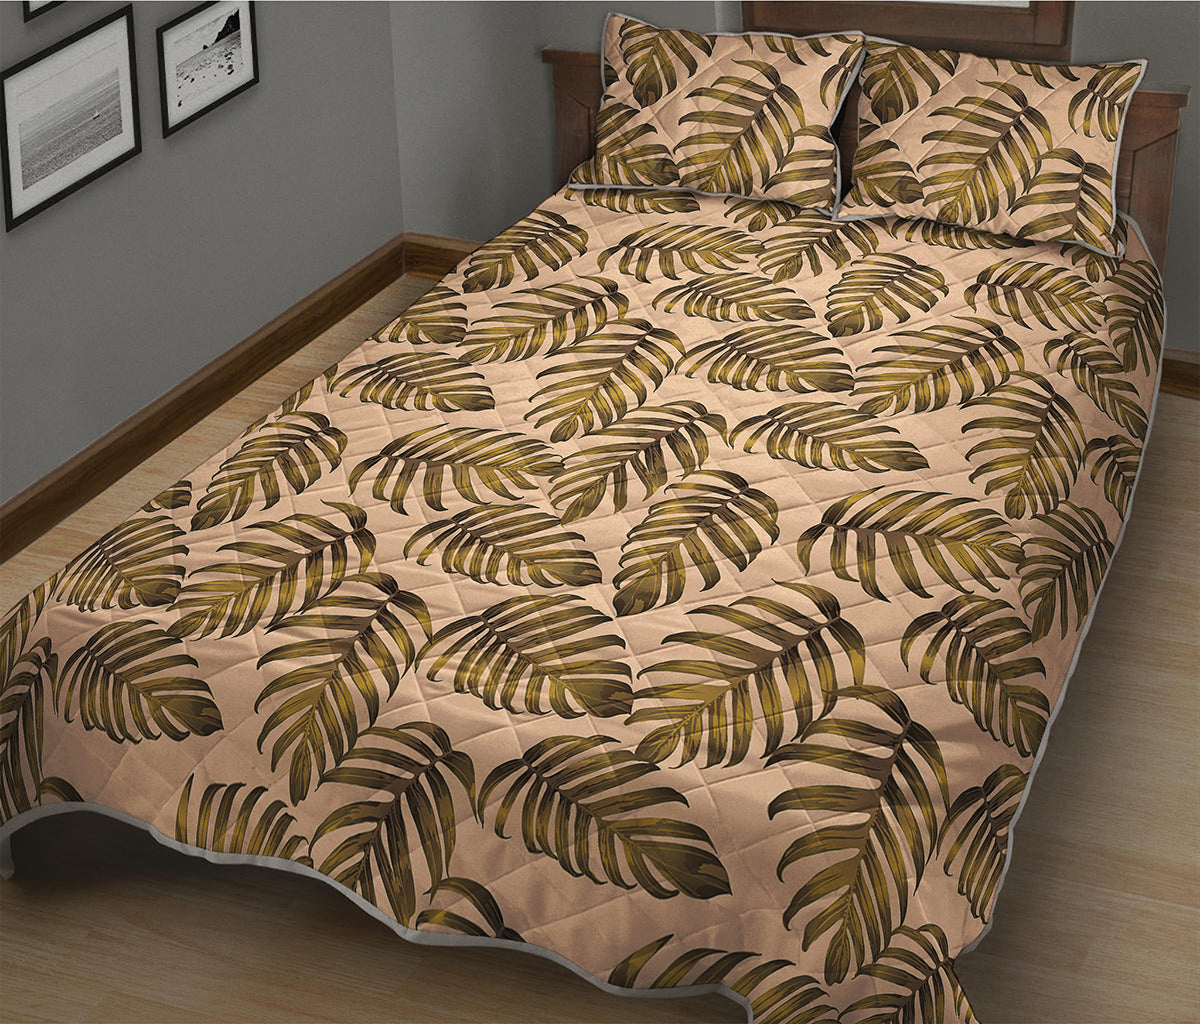 Yellow Monstera Leaves Pattern Print Quilt Bed Set